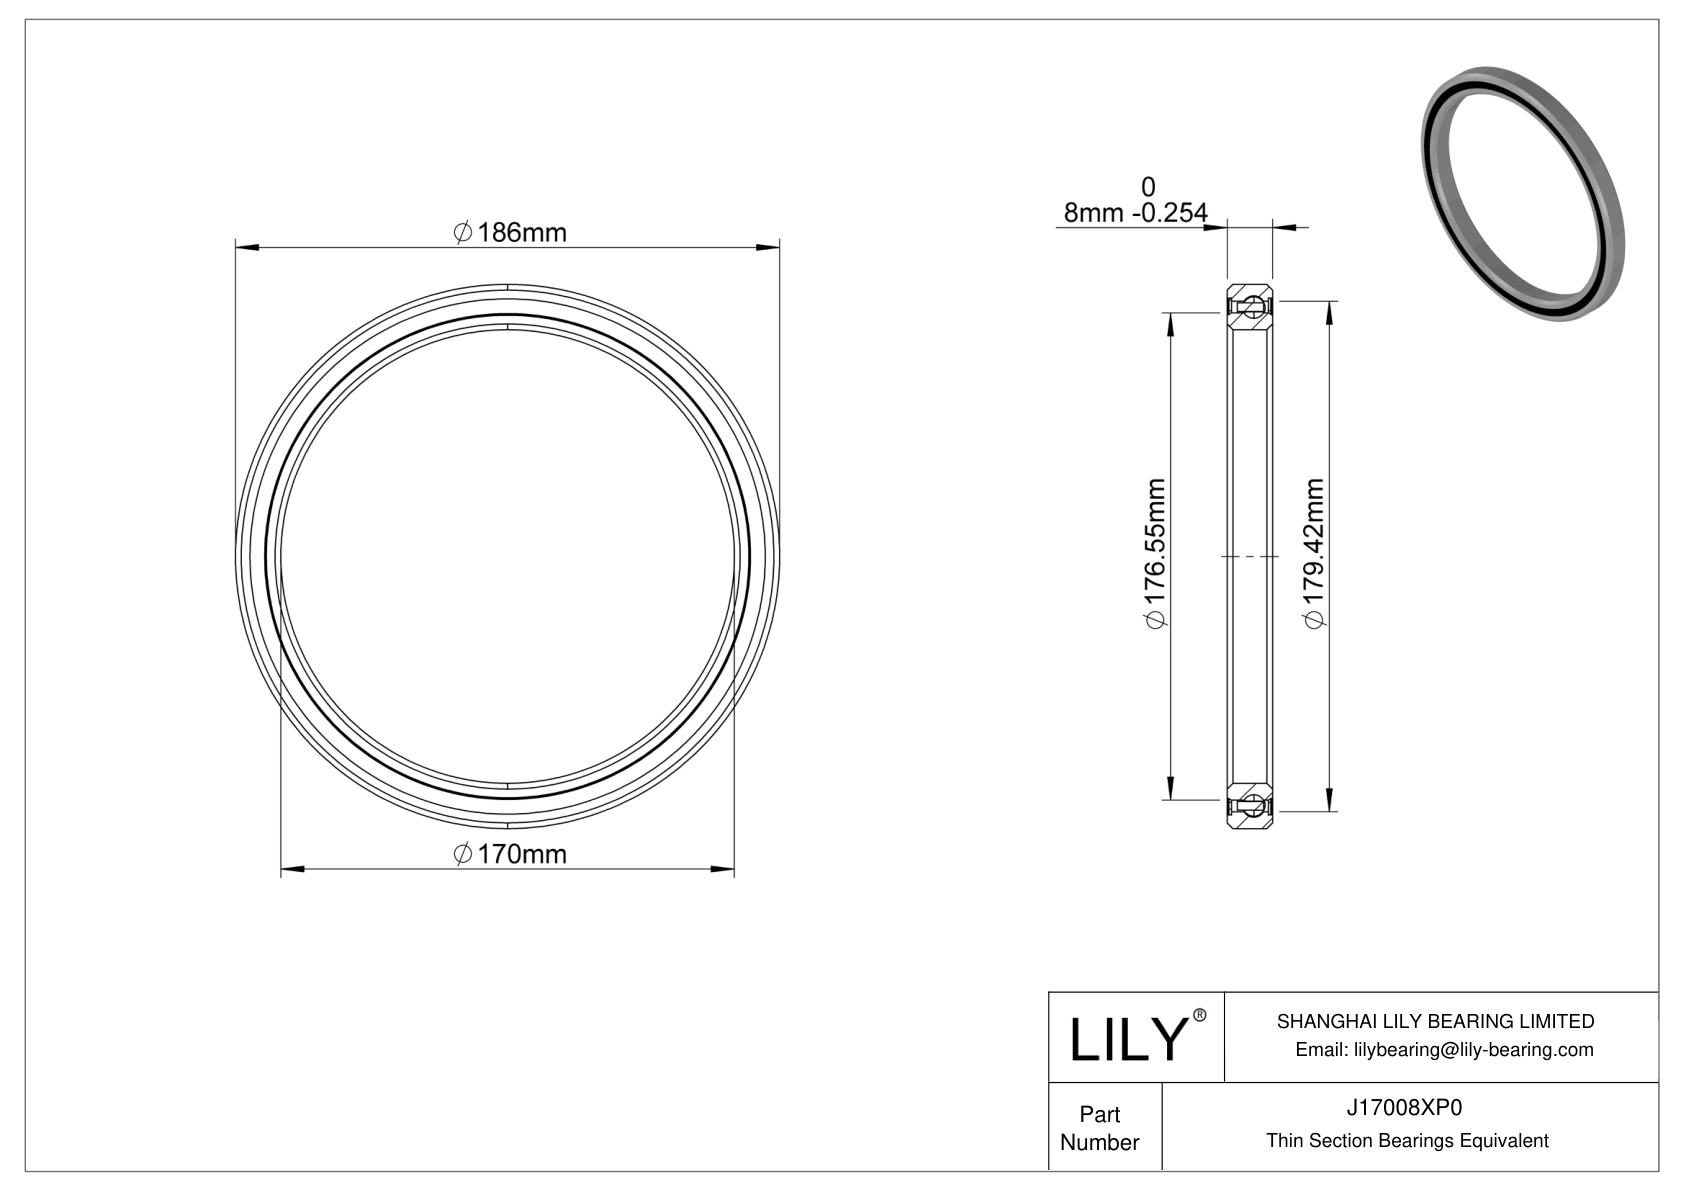 J17008XP0 Constant Section (CS) Bearings cad drawing